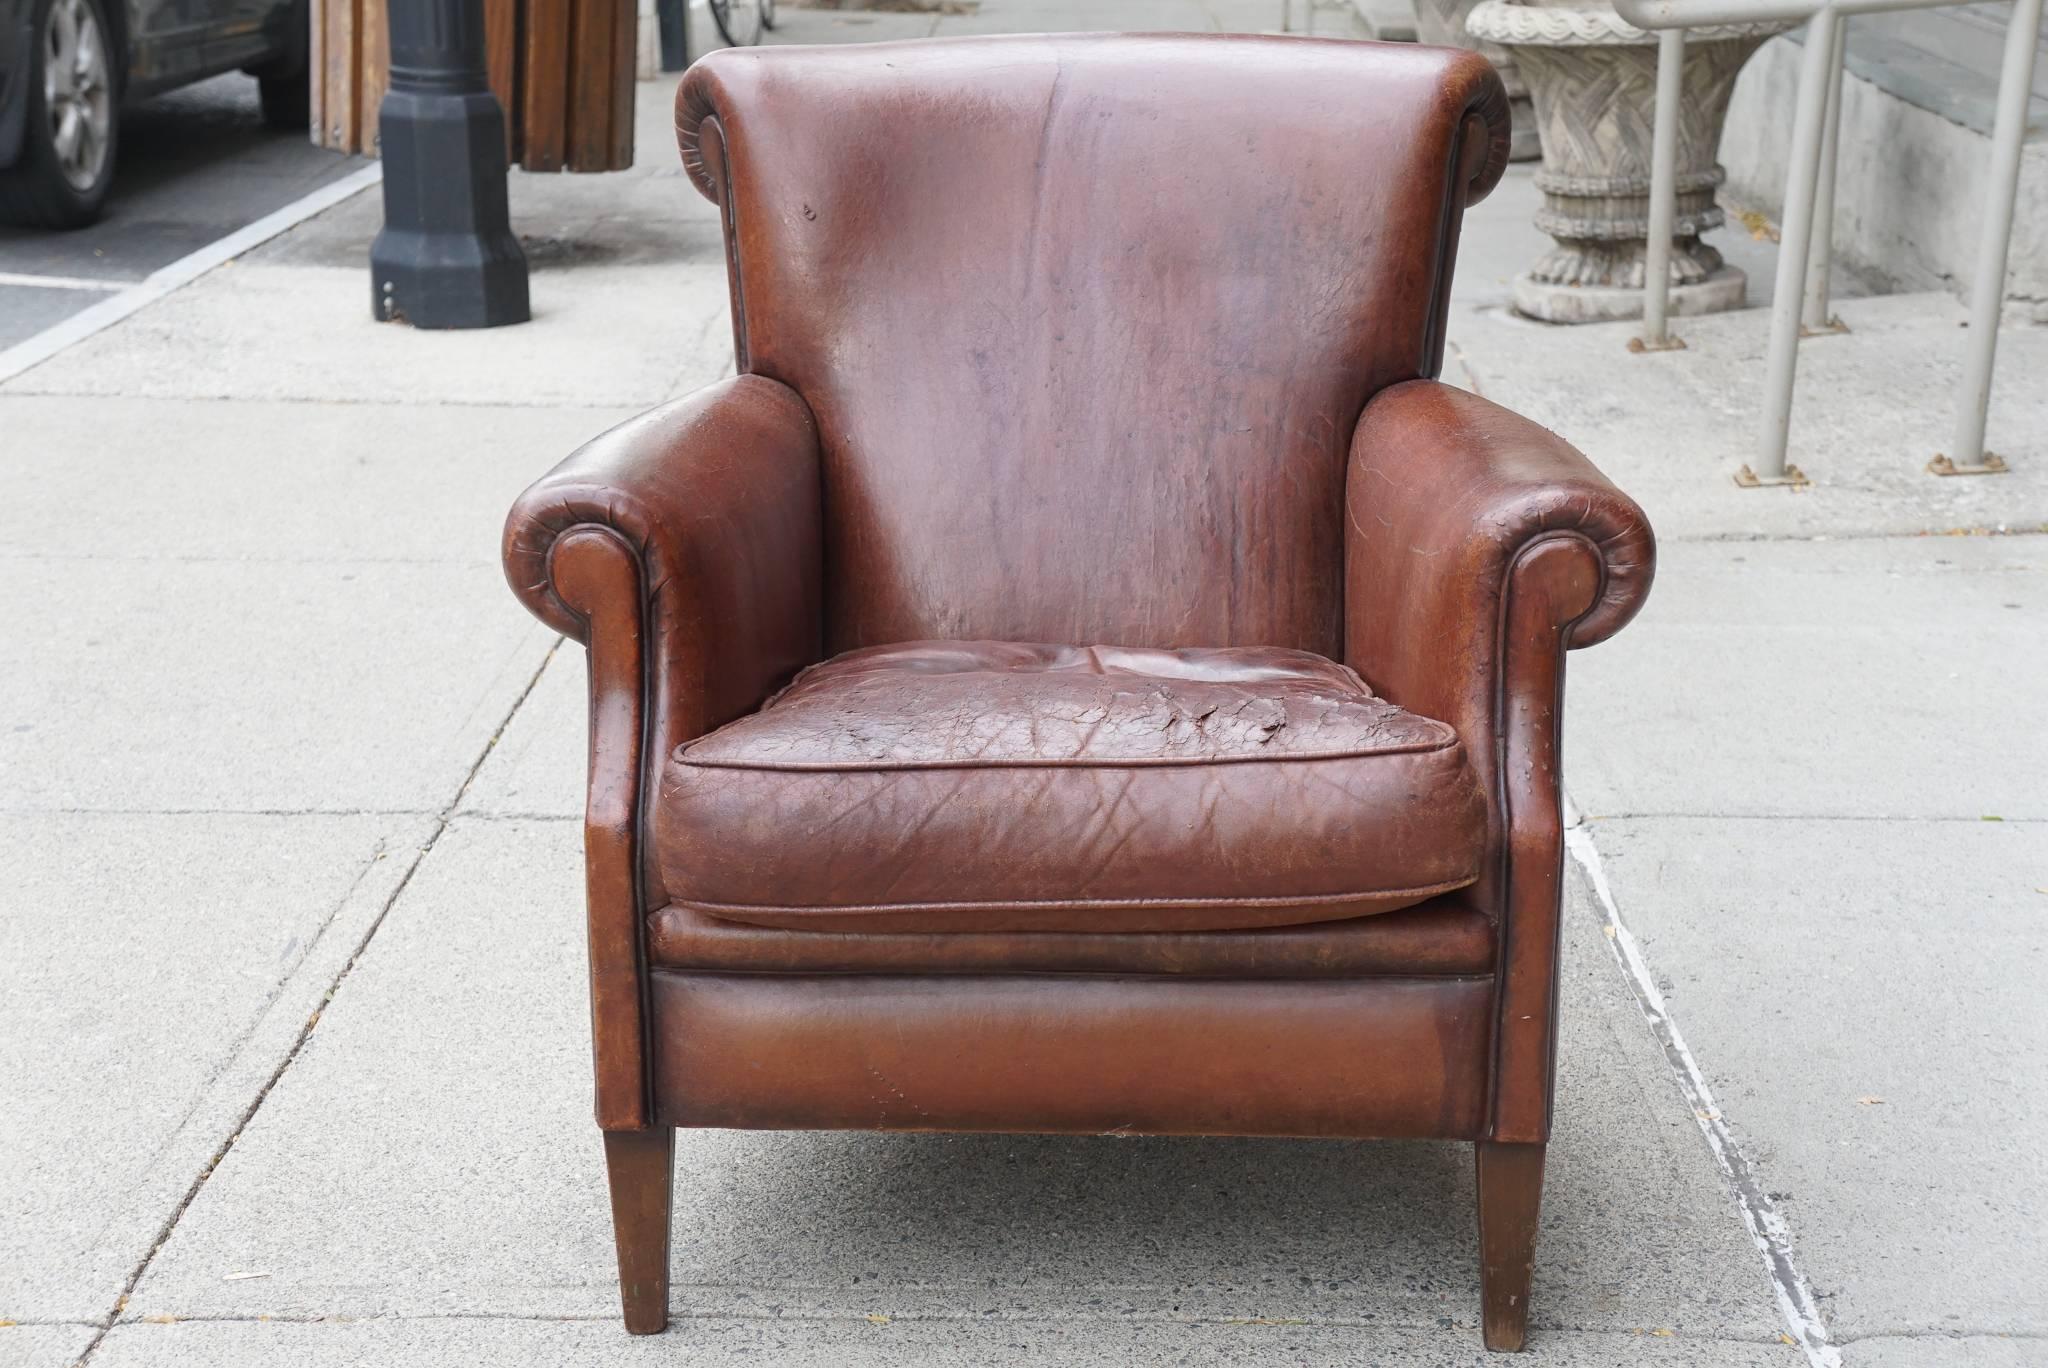 This fine period American Art Deco club chair is comfortable and mannish in form and style. Created circa 1930-1935 in walnut and upholstered in leather the chair has acquired a rich patina of age thru use. The chairs color and patina are great